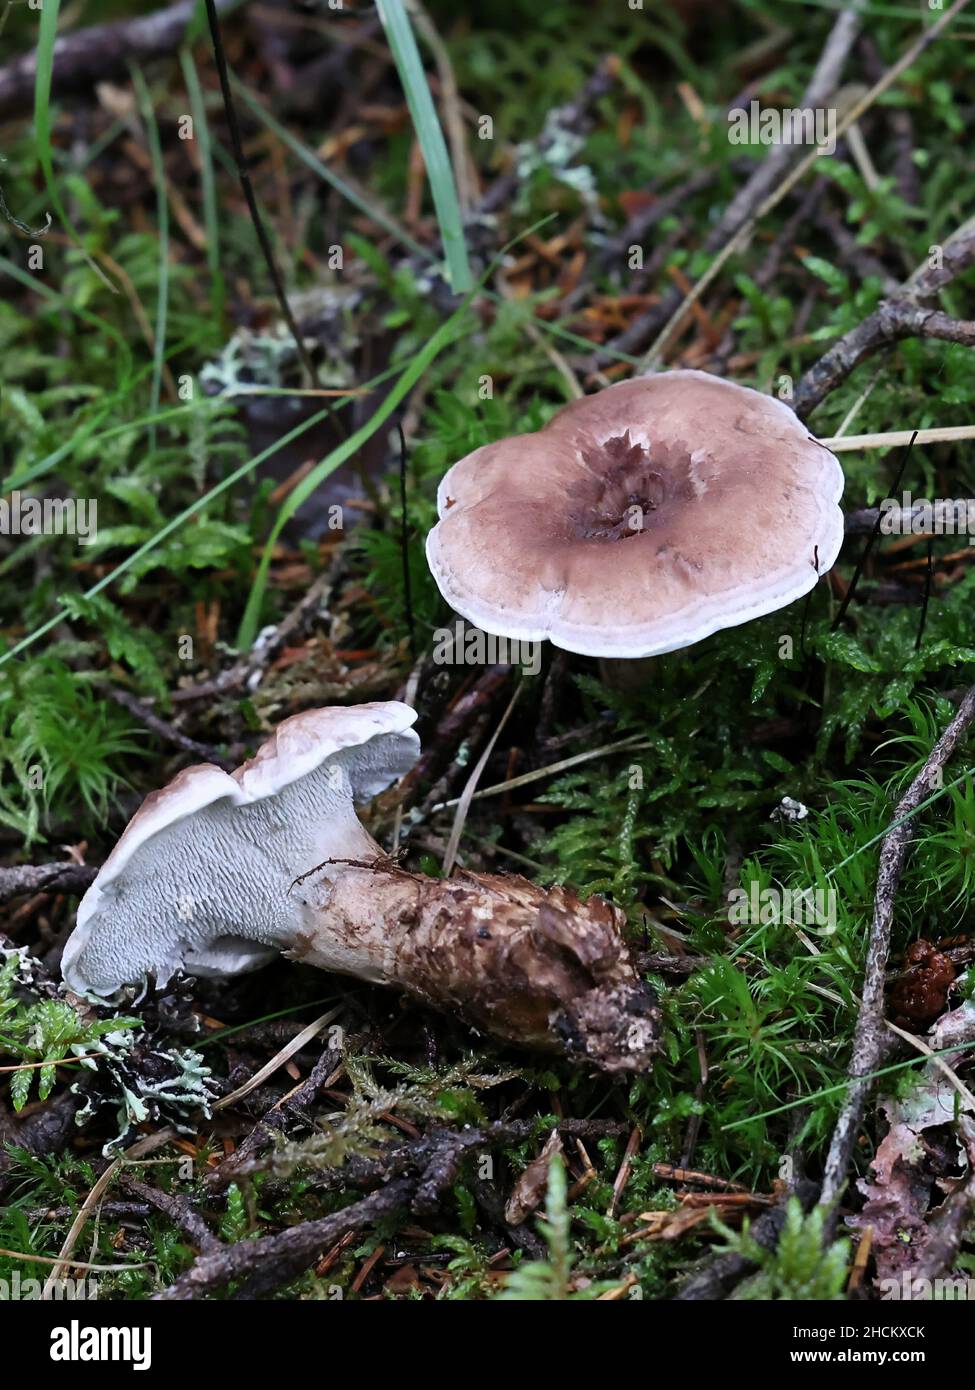 Bankera violascens, known as Spruce Tooth, wild fungus from Finland Stock Photo